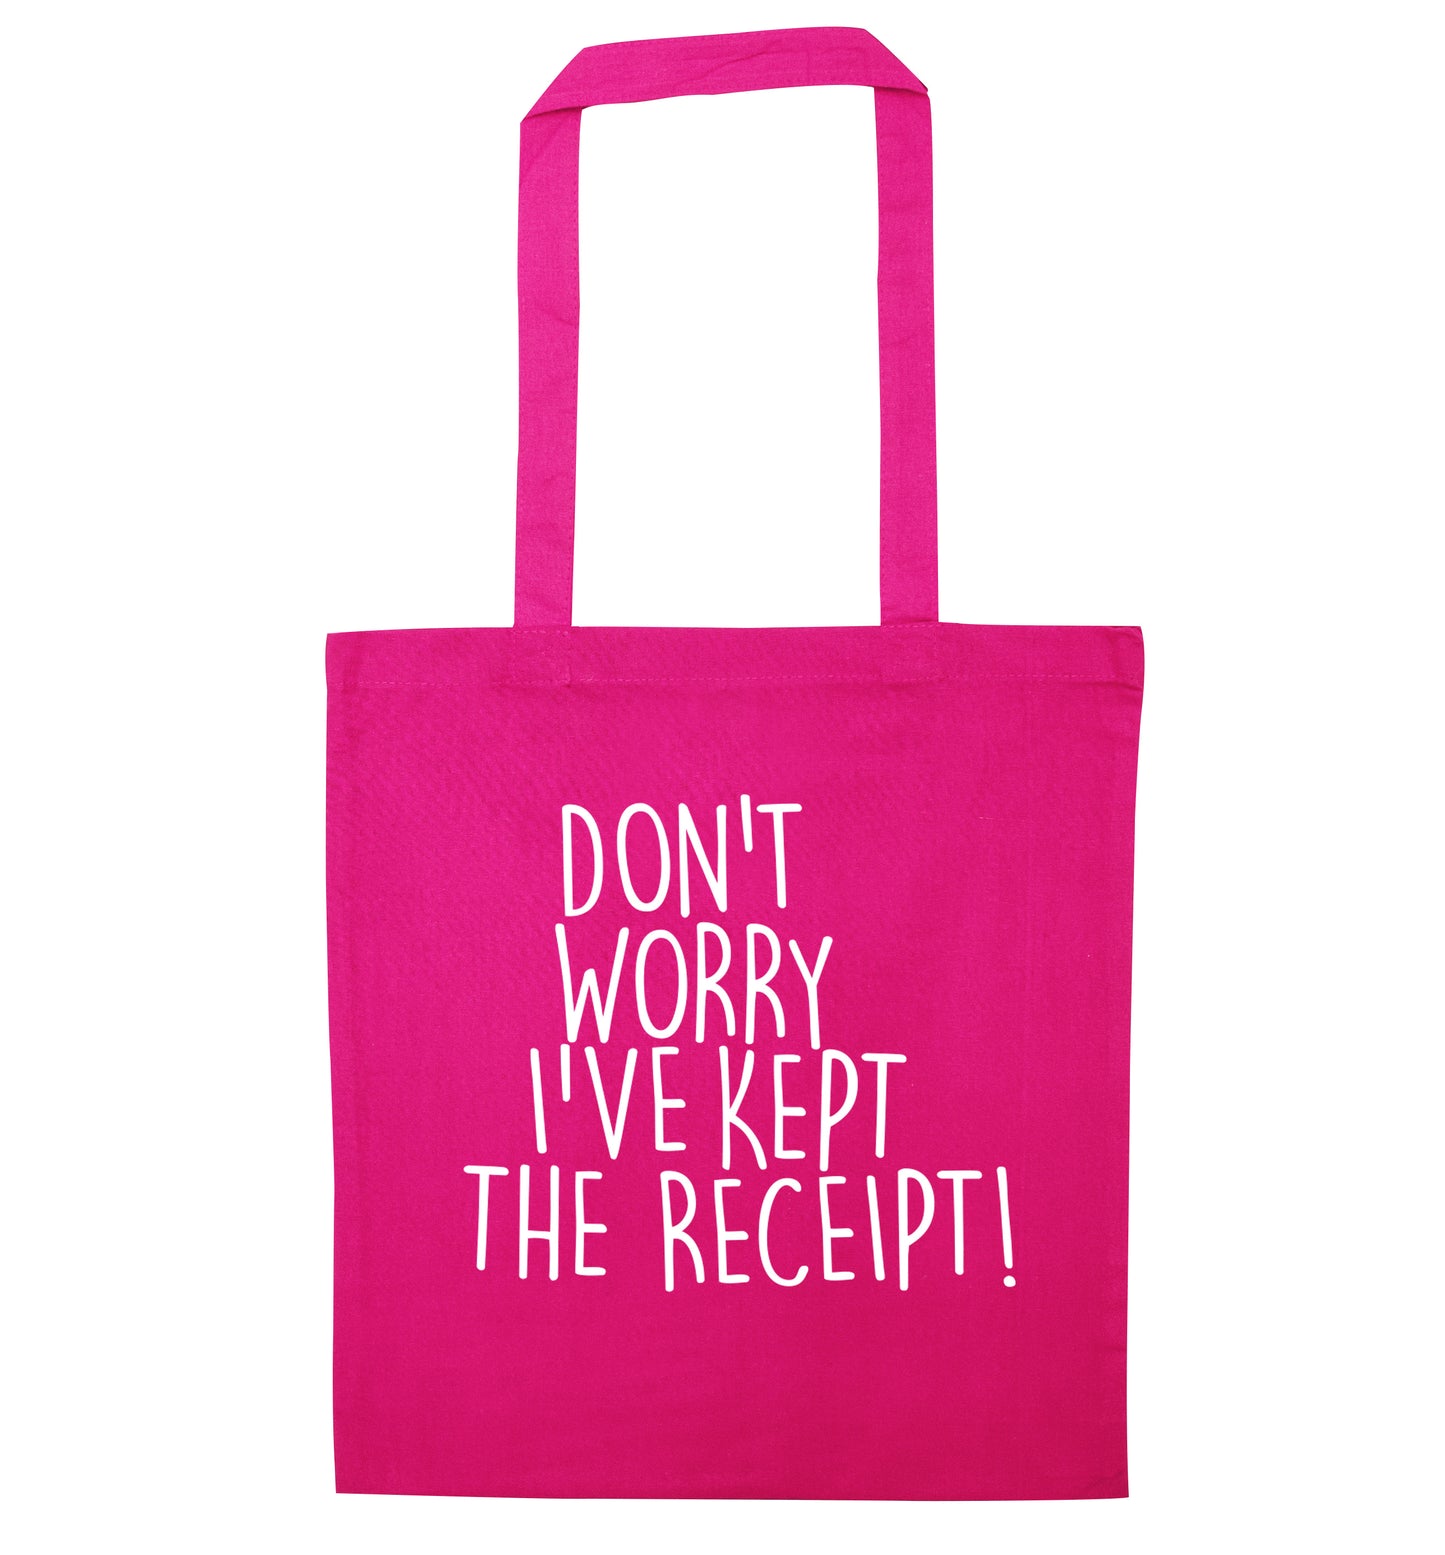 Don't Worry I've Kept the Receipt pink tote bag